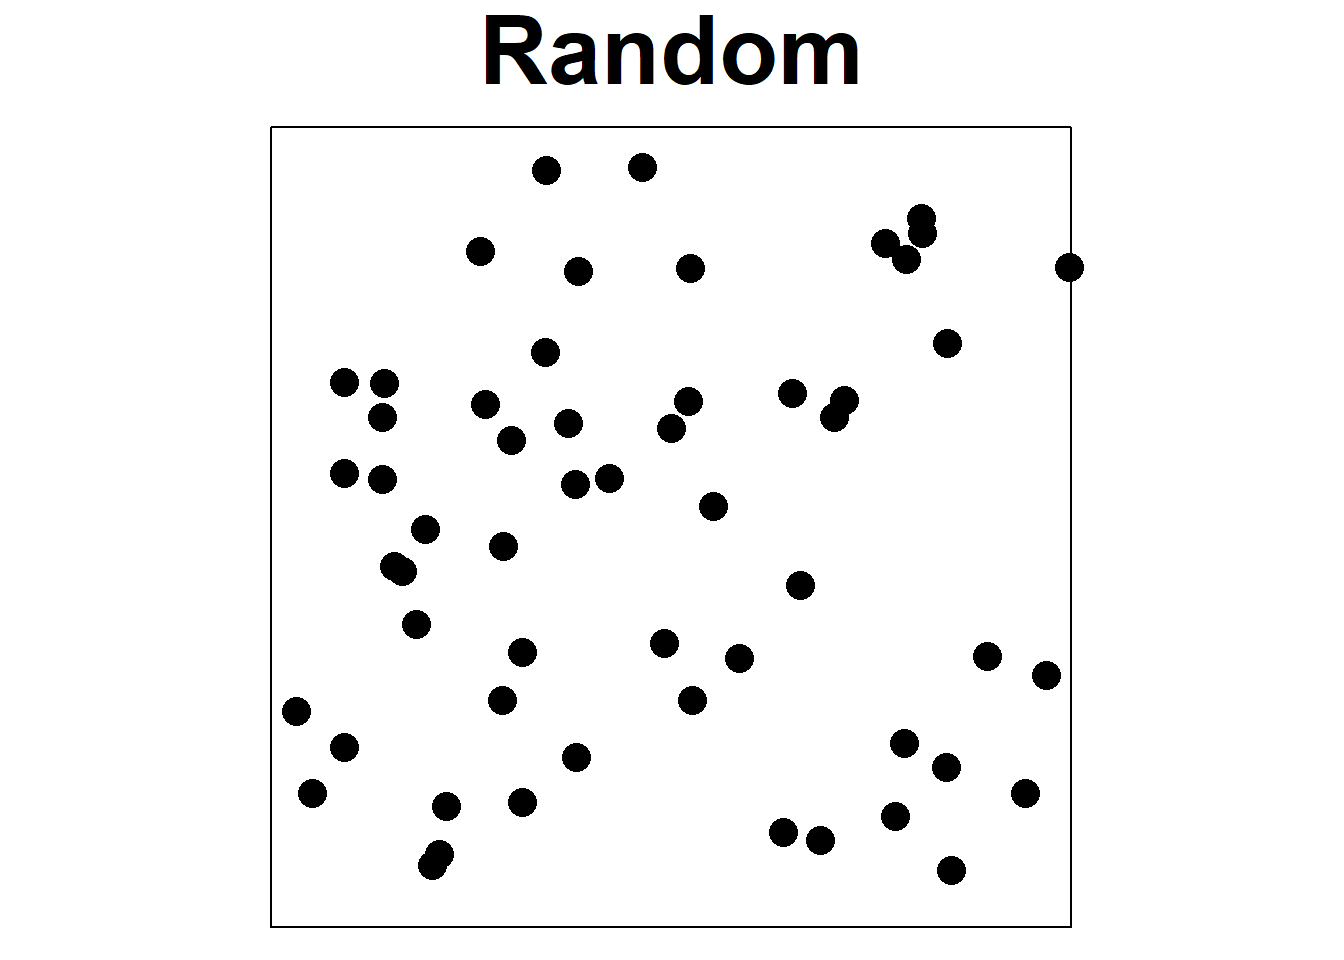 Examples of regular, random, and aggregated point patterns.